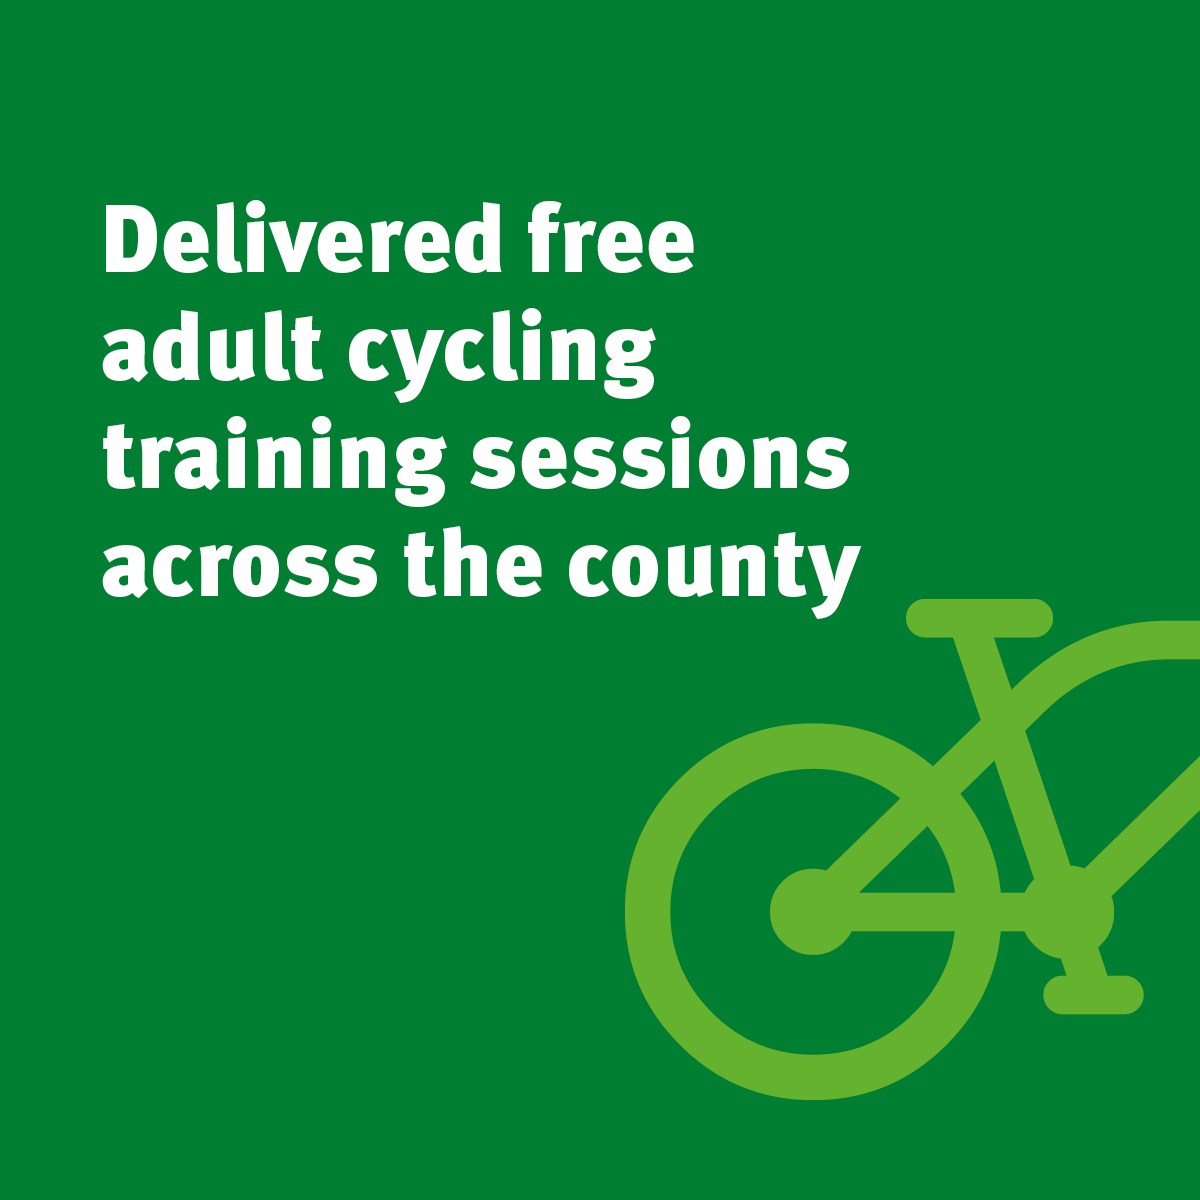 Delivered free adult cycling training sessions across the county